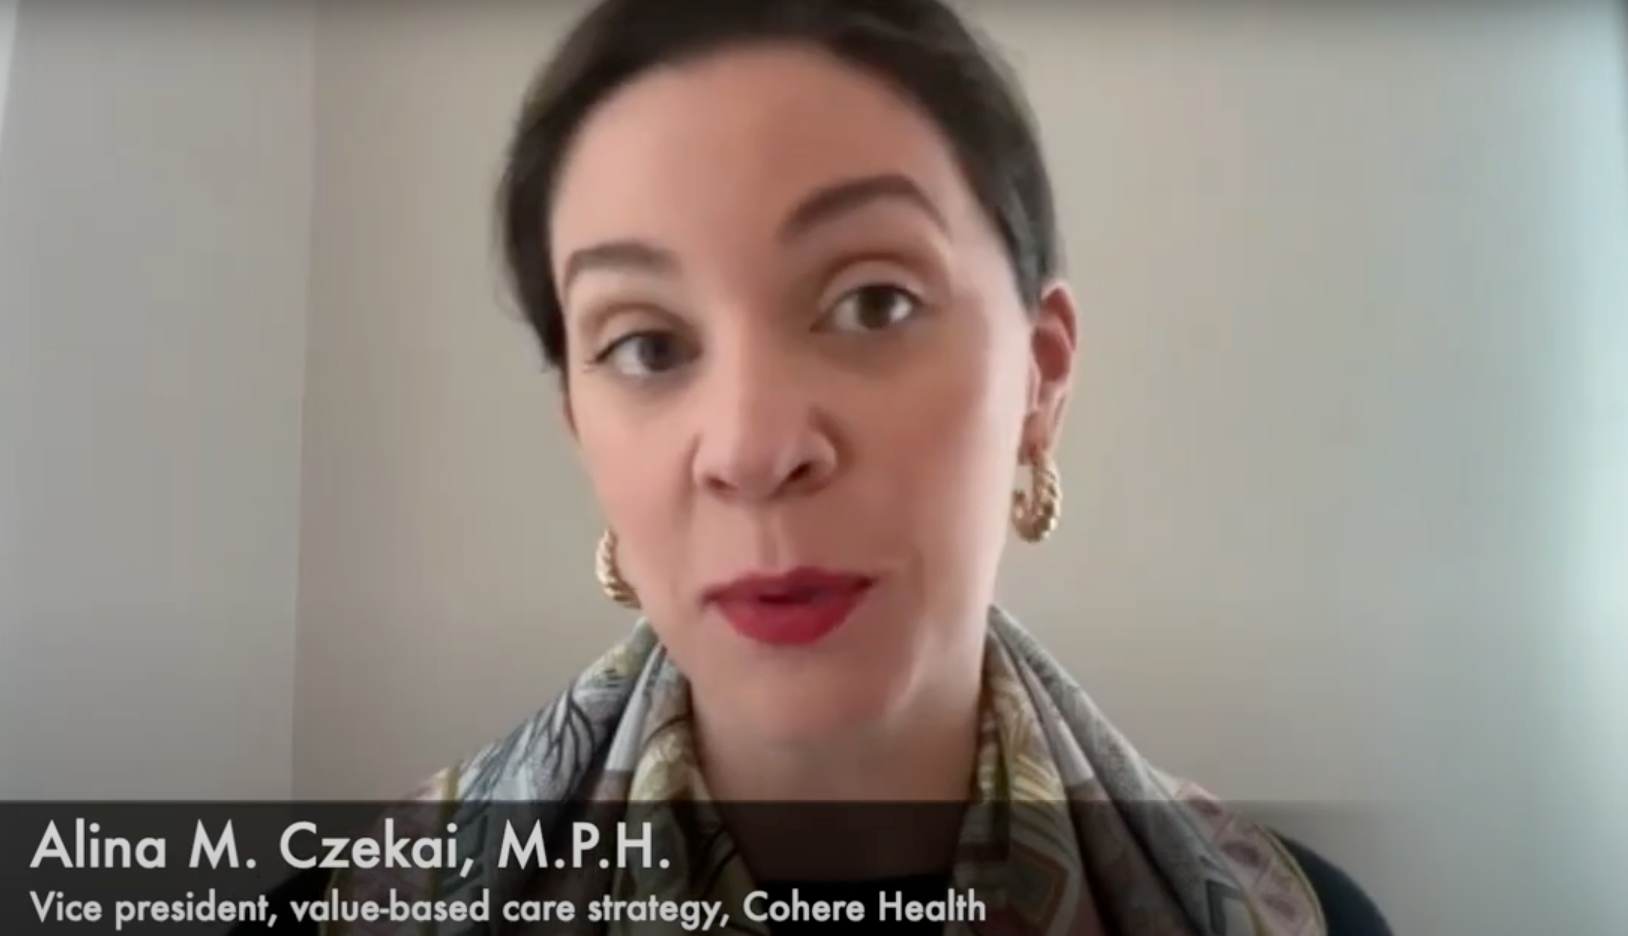 After Helping Her Sister Receive Crucial Care, Alina Czekai of Cohere Health Now Devotes Her Career to Ensure Others Have Easy Access to High-quality Care 